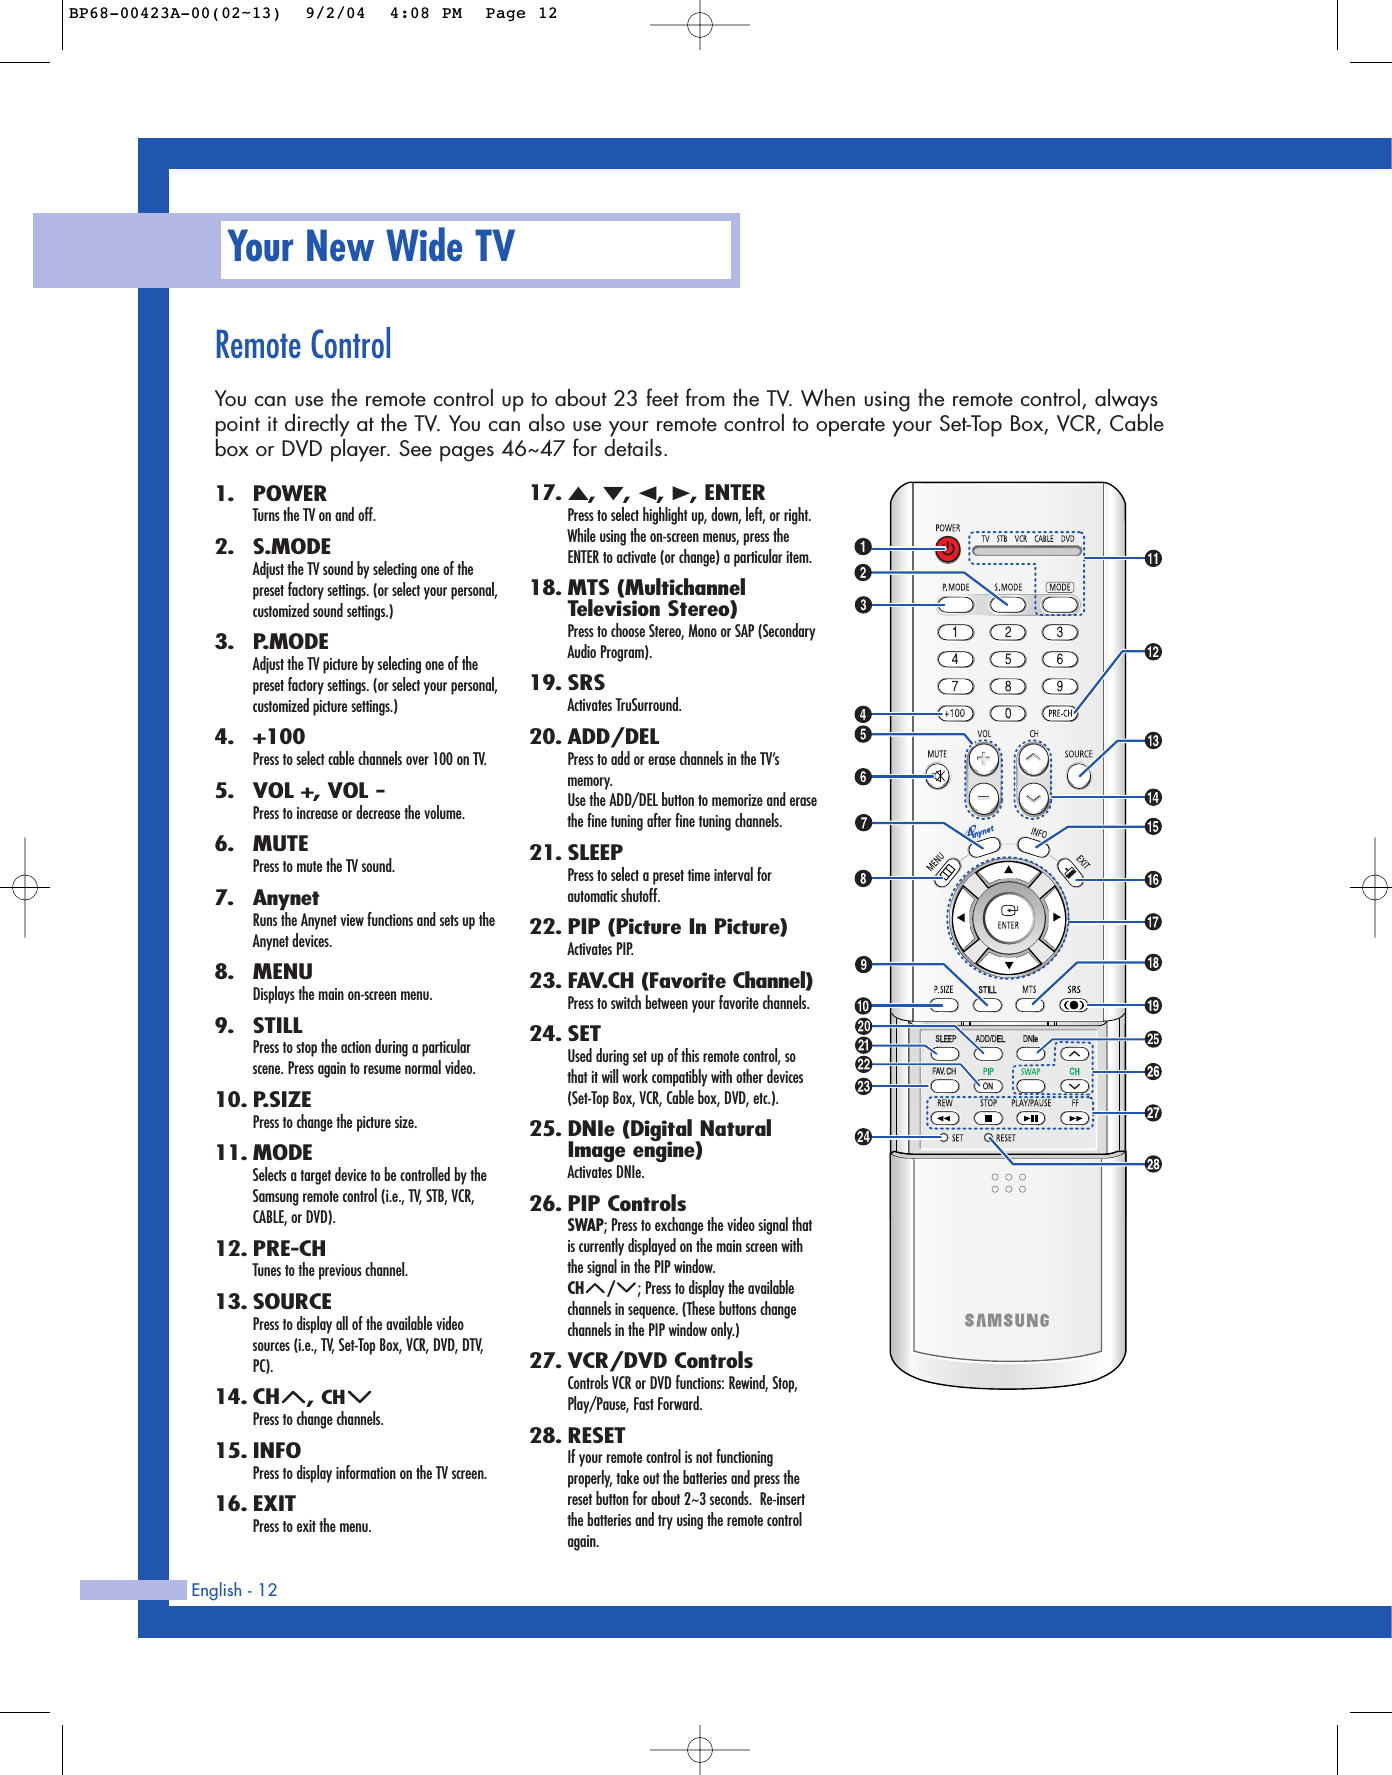 Remote ControlYou can use the remote control up to about 23 feet from the TV. When using the remote control, alwayspoint it directly at the TV. You can also use your remote control to operate your Set-Top Box, VCR, Cablebox or DVD player. See pages 46~47 for details.Your New Wide TVEnglish - 121. POWERTurns the TV on and off.2. S.MODEAdjust the TV sound by selecting one of thepreset factory settings. (or select your personal,customized sound settings.)3. P.MODEAdjust the TV picture by selecting one of thepreset factory settings. (or select your personal,customized picture settings.)4. +100Press to select cable channels over 100 on TV.5.  VOL +, VOL -Press to increase or decrease the volume.6. MUTEPress to mute the TV sound.7. AnynetRuns the Anynet view functions and sets up theAnynet devices.8. MENUDisplays the main on-screen menu.9. STILLPress to stop the action during a particularscene. Press again to resume normal video.10. P.SIZEPress to change the picture size.11. MODESelects a target device to be controlled by theSamsung remote control (i.e., TV, STB, VCR,CABLE, or DVD).12. PRE-CHTunes to the previous channel.13. SOURCEPress to display all of the available videosources (i.e., TV, Set-Top Box, VCR, DVD, DTV,PC).14. CH , CHPress to change channels.15. INFOPress to display information on the TV screen.16. EXITPress to exit the menu.17. ▲, ▼, œ, √, ENTERPress to select highlight up, down, left, or right.While using the on-screen menus, press theENTER to activate (or change) a particular item.18. MTS (MultichannelTelevision Stereo)Press to choose Stereo, Mono or SAP (SecondaryAudio Program).19. SRSActivates TruSurround.20. ADD/DELPress to add or erase channels in the TV’smemory.Use the ADD/DEL button to memorize and erasethe fine tuning after fine tuning channels.21. SLEEPPress to select a preset time interval forautomatic shutoff.22. PIP (Picture In Picture)Activates PIP.23. FAV.CH (Favorite Channel)Press to switch between your favorite channels.24. SETUsed during set up of this remote control, sothat it will work compatibly with other devices(Set-Top Box, VCR, Cable box, DVD, etc.).25. DNIe (Digital NaturalImage engine)Activates DNIe.26. PIP ControlsSWAP; Press to exchange the video signal thatis currently displayed on the main screen withthe signal in the PIP window.CH / ; Press to display the availablechannels in sequence. (These buttons changechannels in the PIP window only.)27. VCR/DVD ControlsControls VCR or DVD functions: Rewind, Stop,Play/Pause, Fast Forward.28. RESETIf your remote control is not functioningproperly, take out the batteries and press thereset button for about 2~3 seconds.  Re-insertthe batteries and try using the remote controlagain. BP68-00423A-00(02~13)  9/2/04  4:08 PM  Page 12